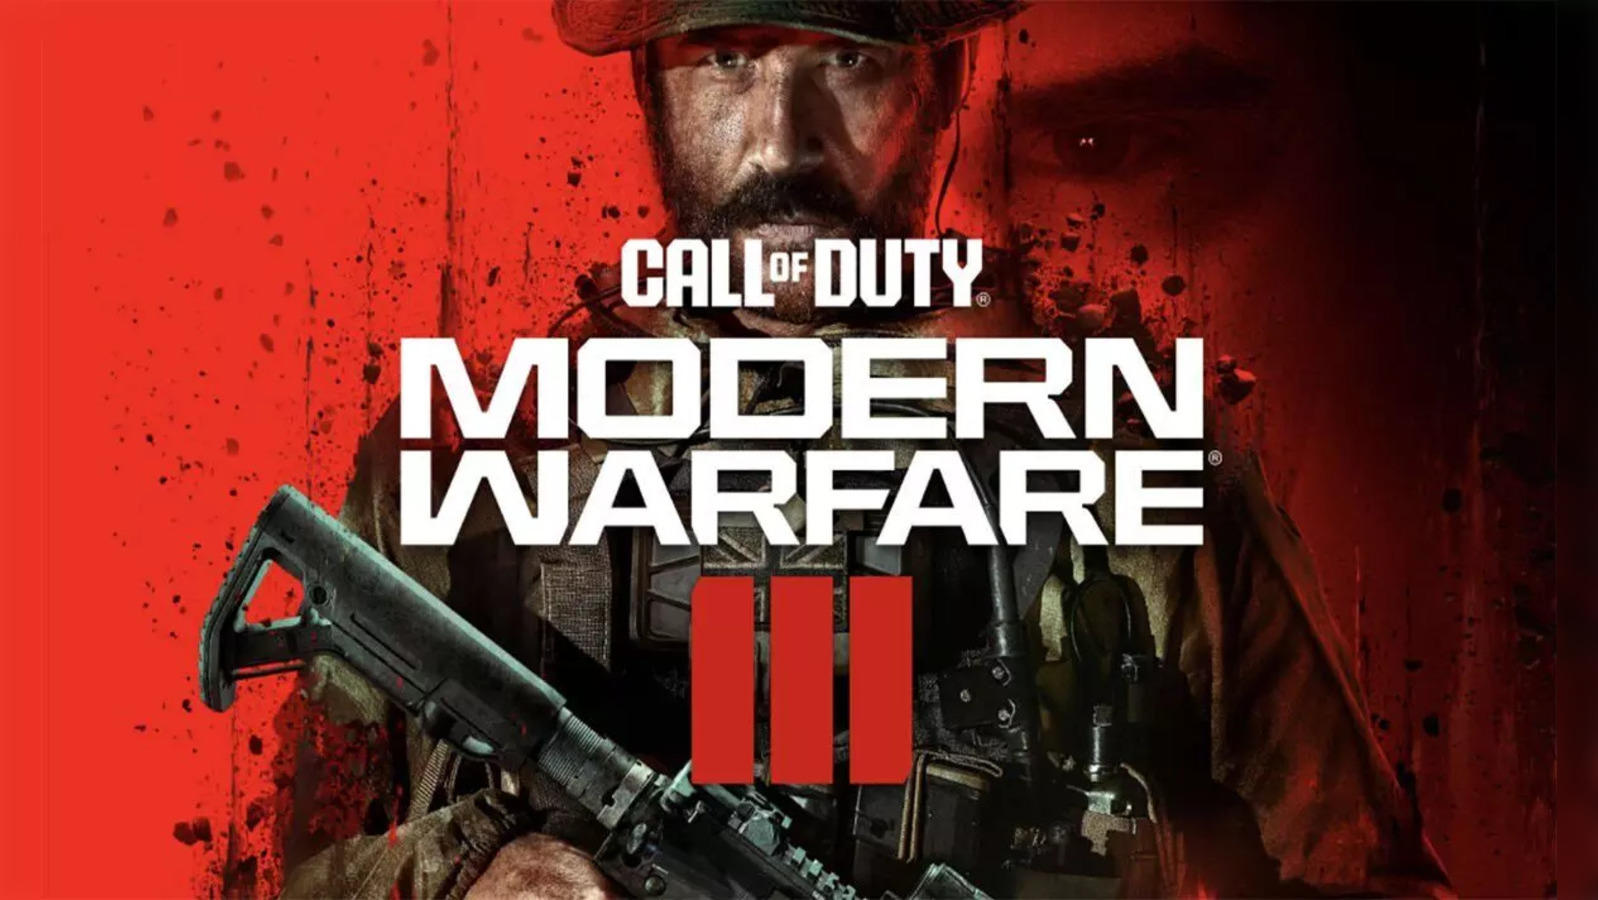 Call of PlayStation 3: reviews. Duty: Details - date 3 Warfare here PC, Xbox Modern and of on initial series Call Economic The 5/4, Warfare Duty: Times release Modern